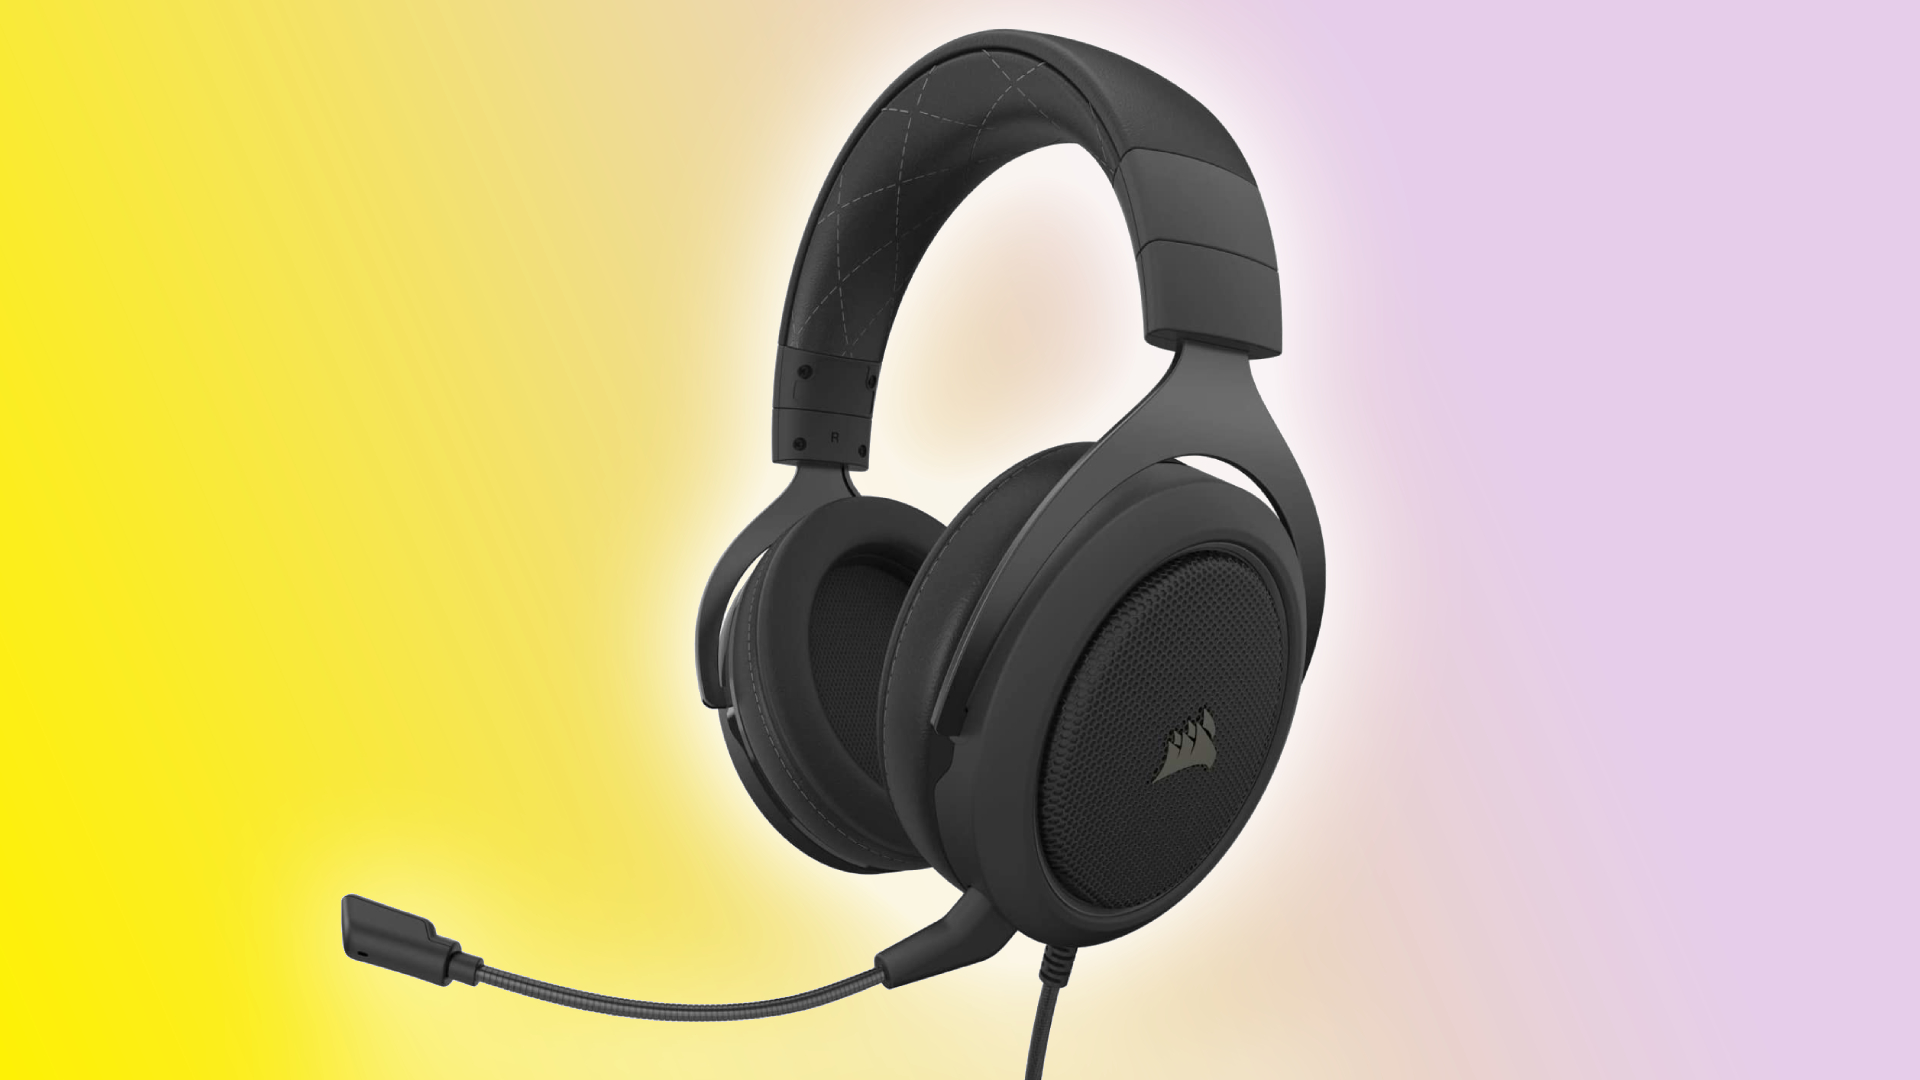 Grab 30% off Corsair's HS60 Pro gaming headset on Amazon